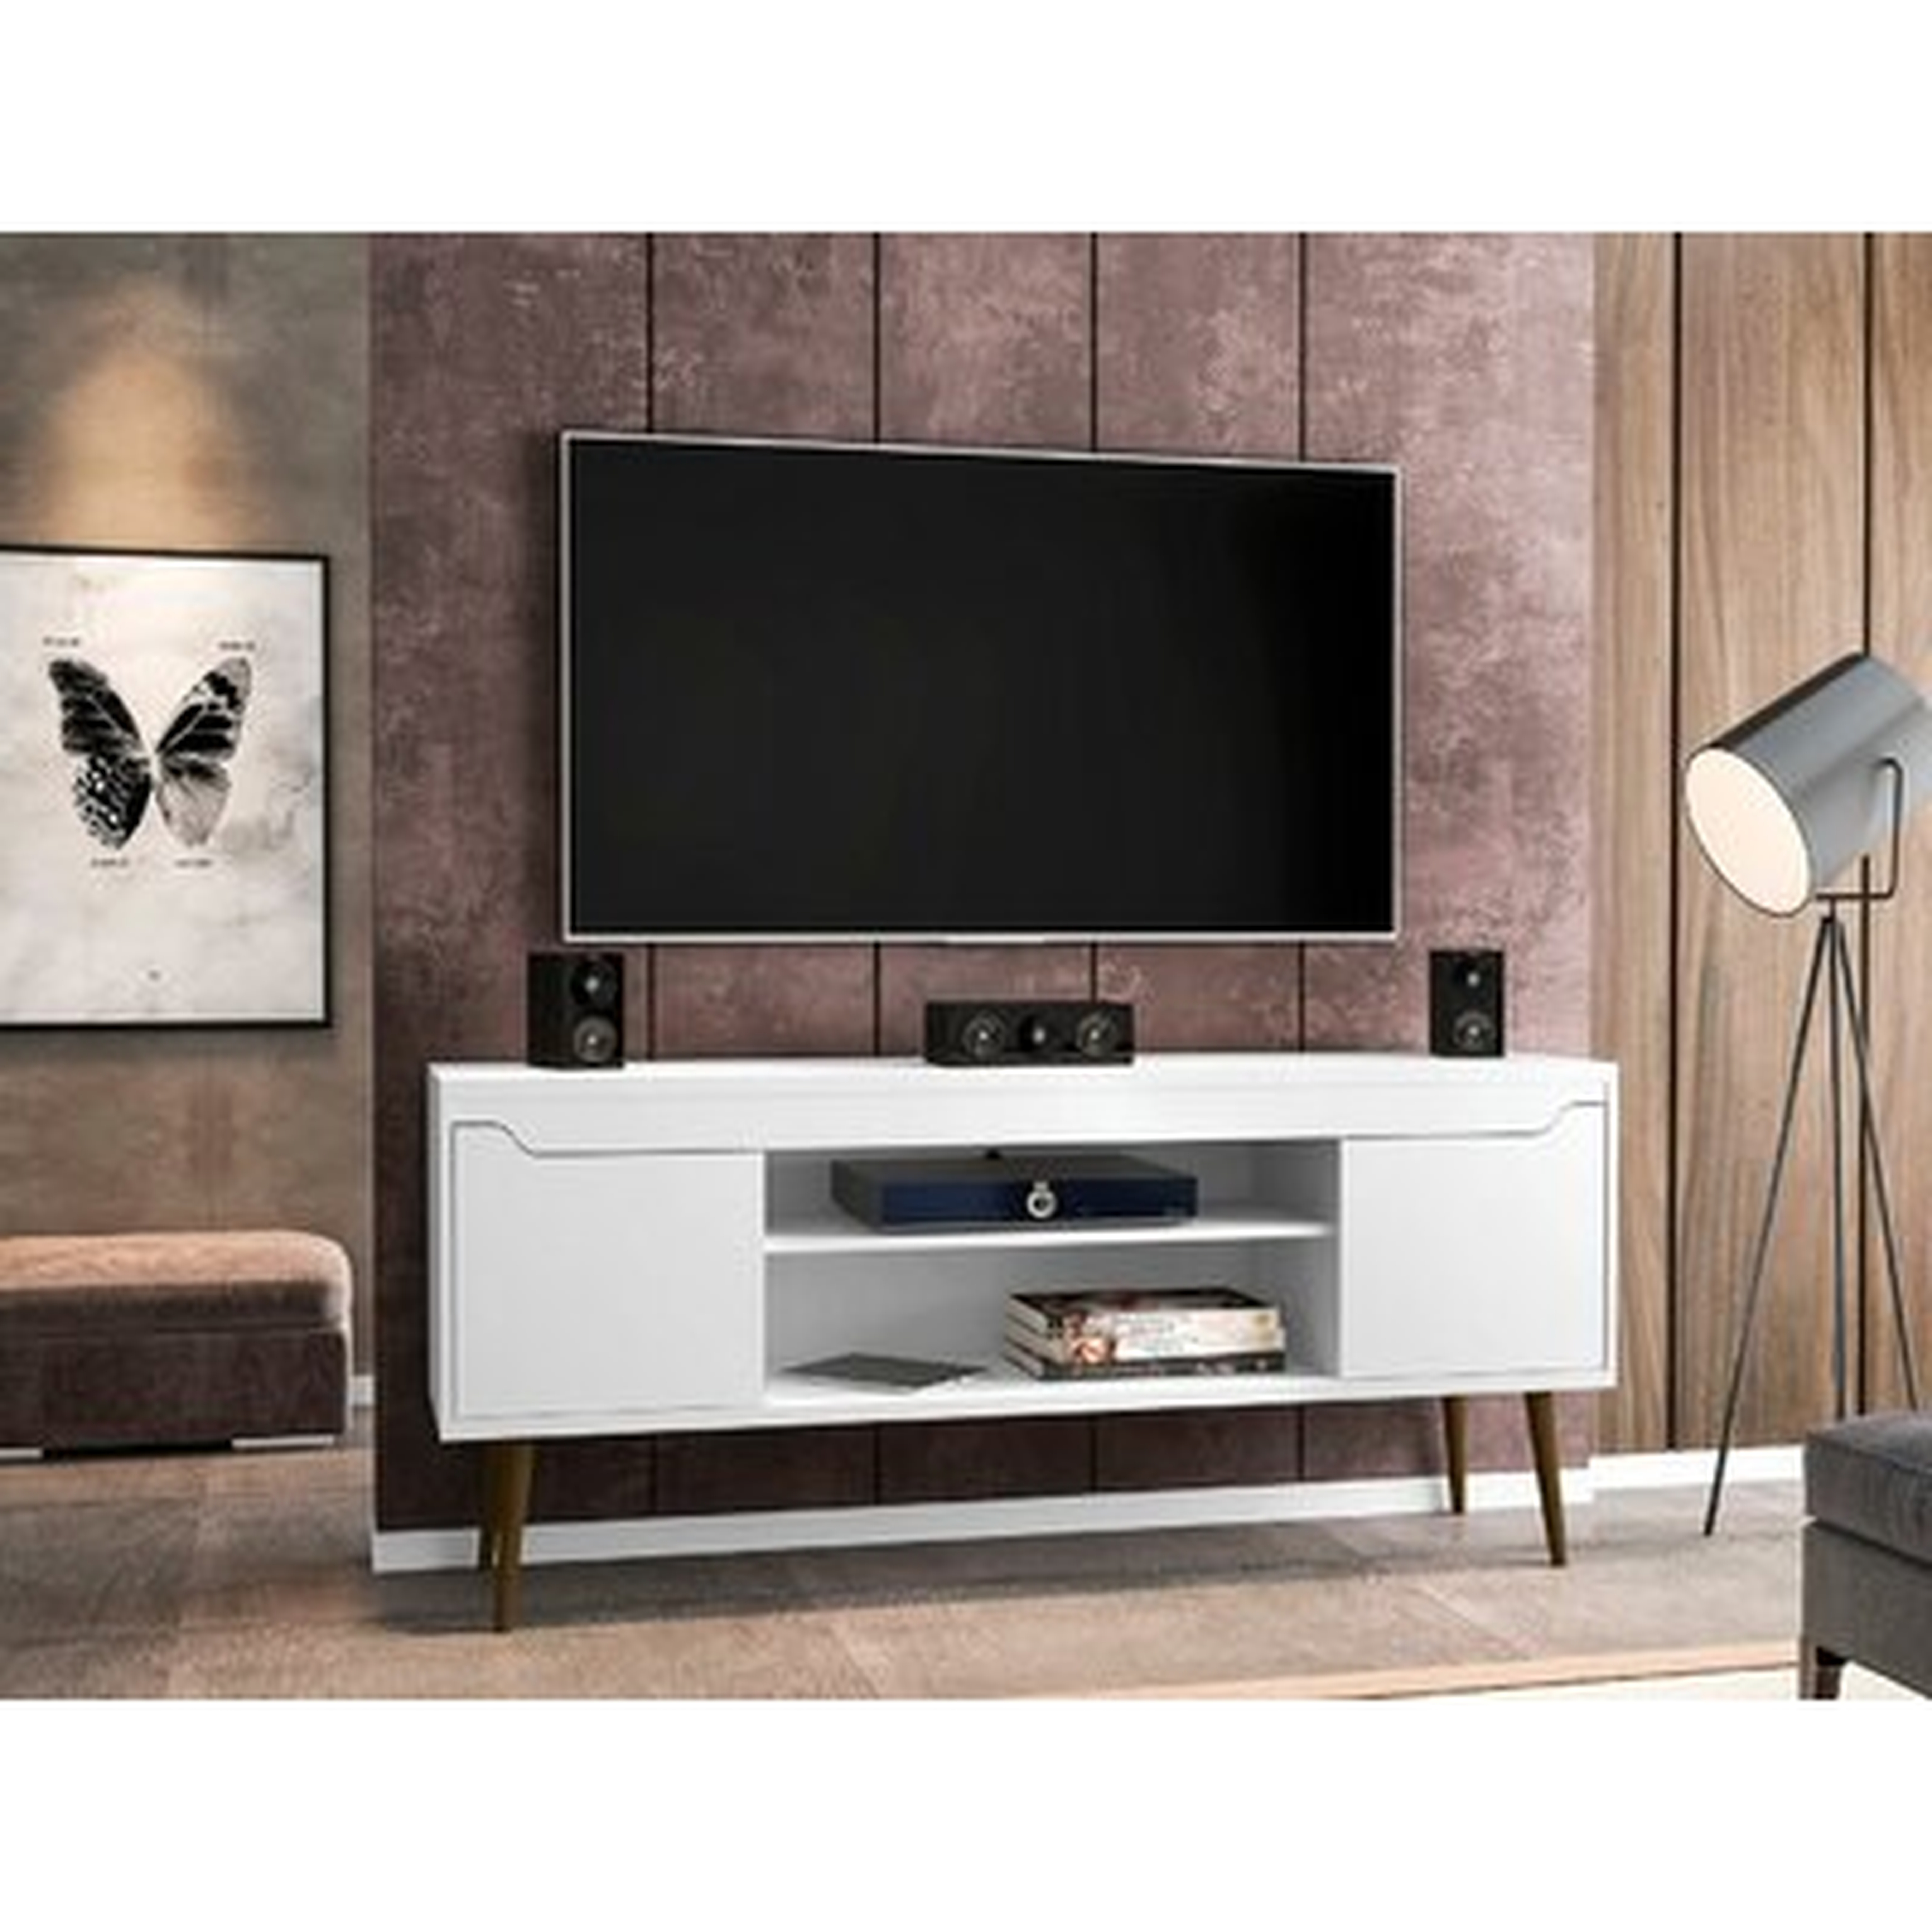 Bewley TV Stand for TVs up to 60" - Wayfair